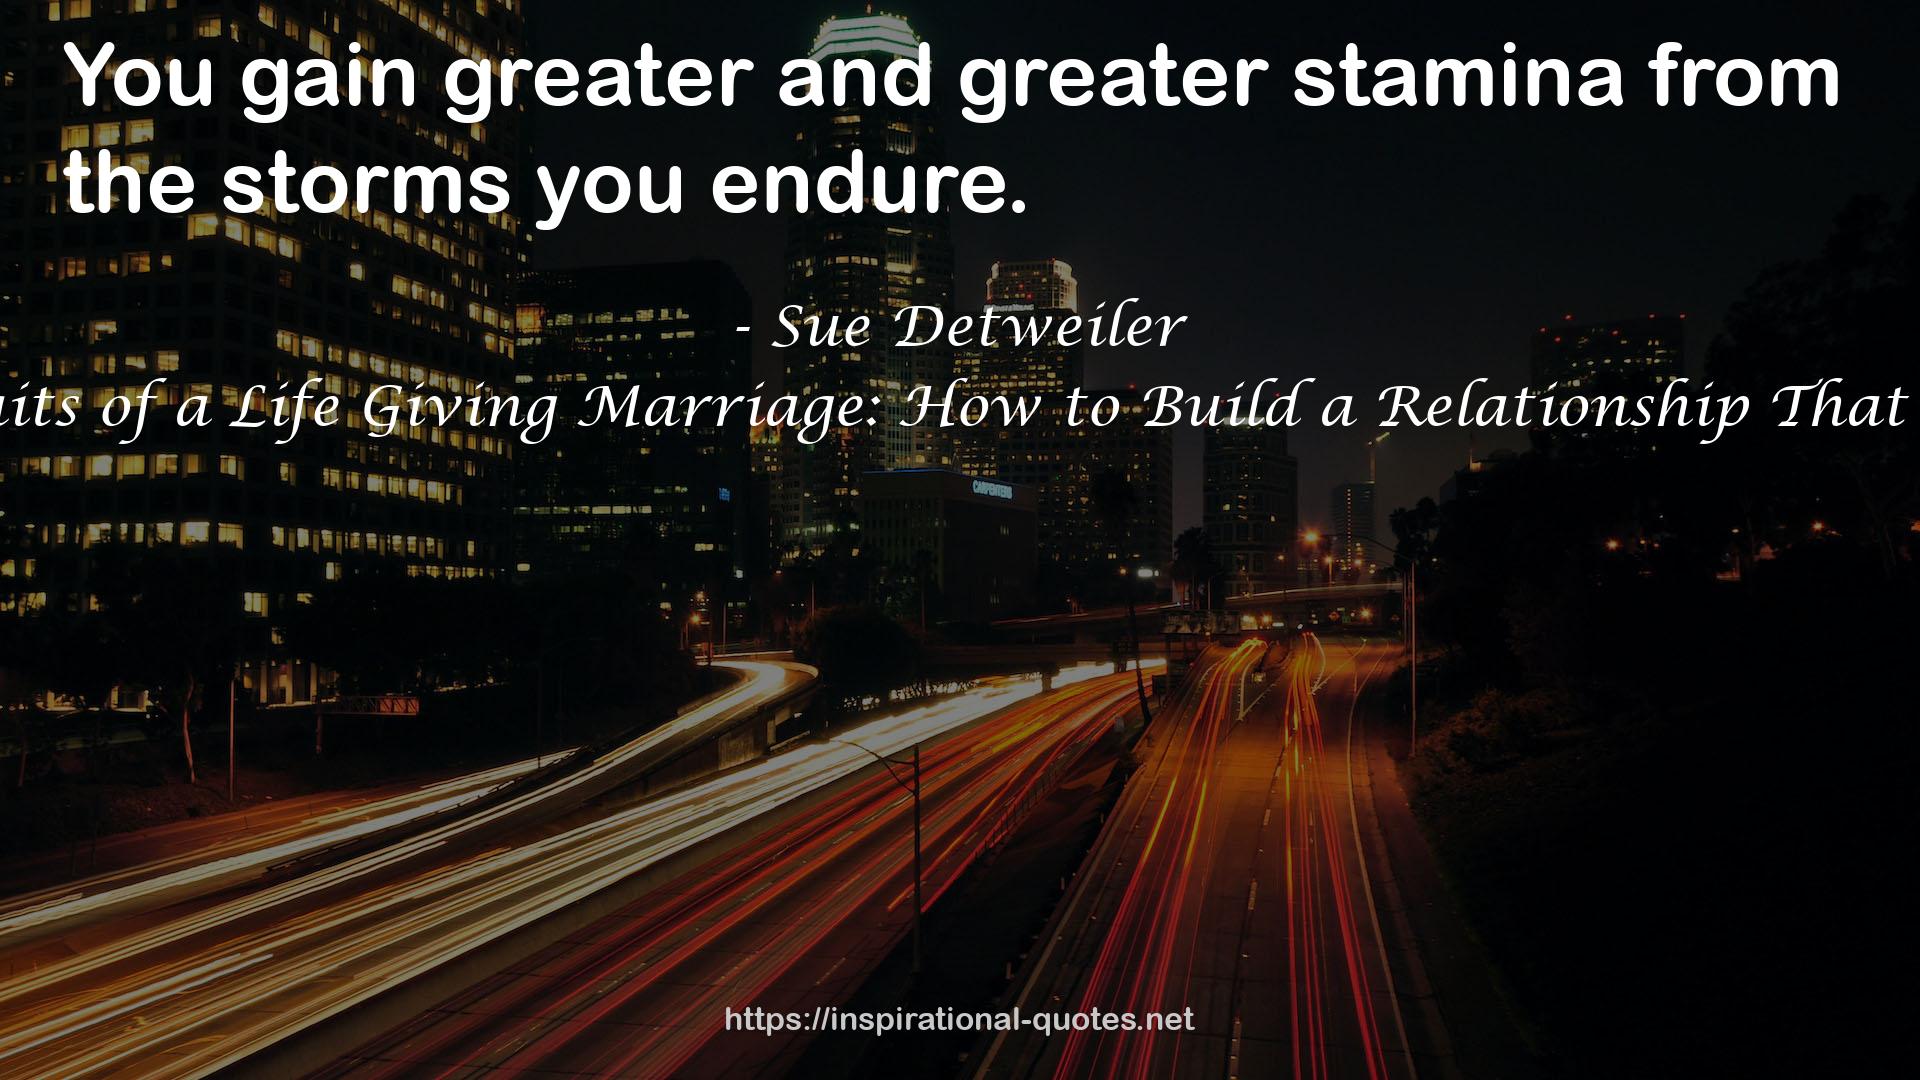 9 Traits of a Life Giving Marriage: How to Build a Relationship That Lasts QUOTES